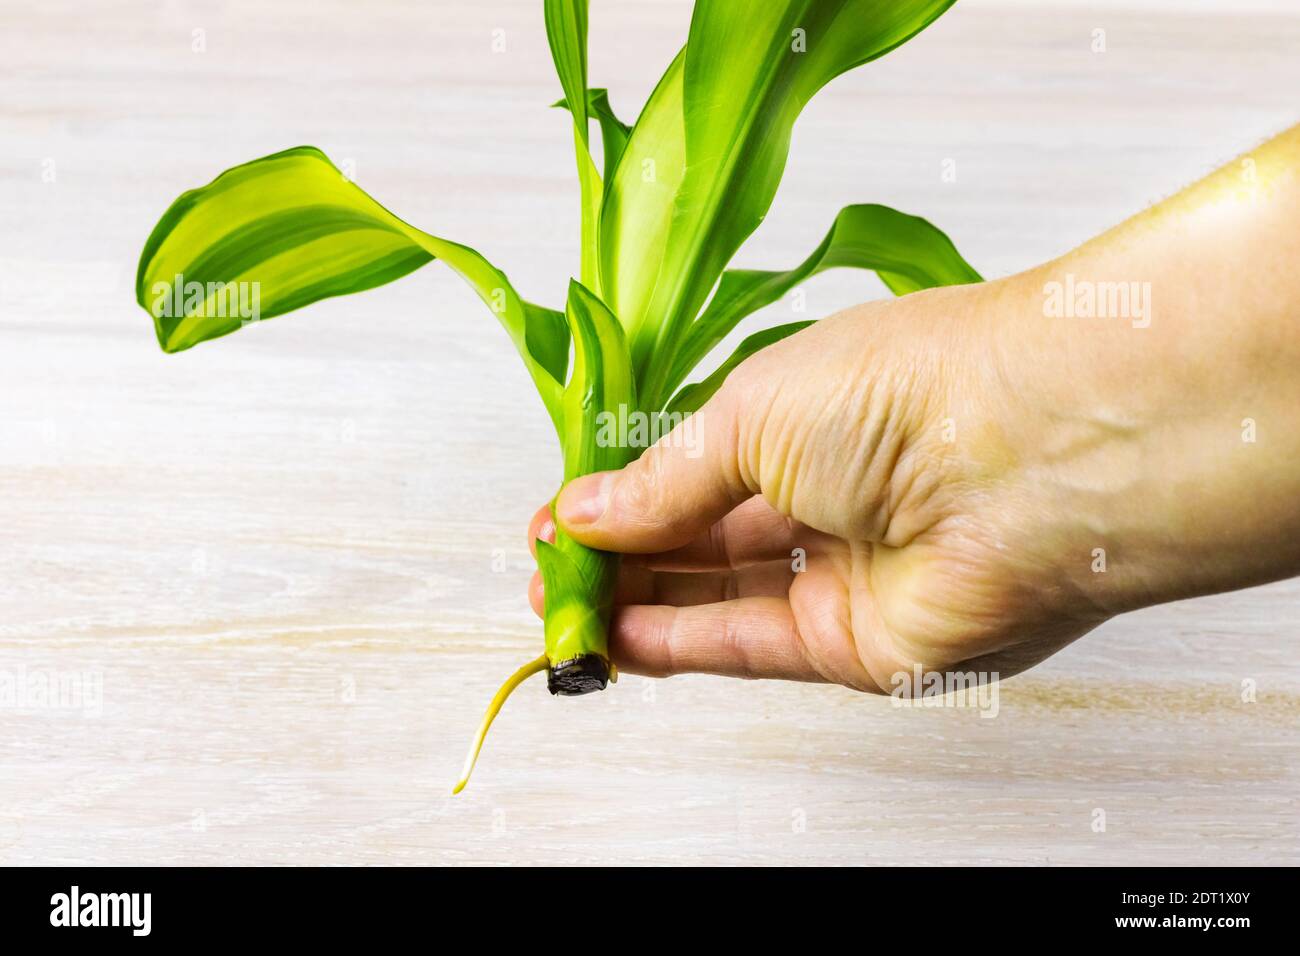 A female hand holds a green branch Dracaena fragrans home plant on a white wooden background Stock Photo